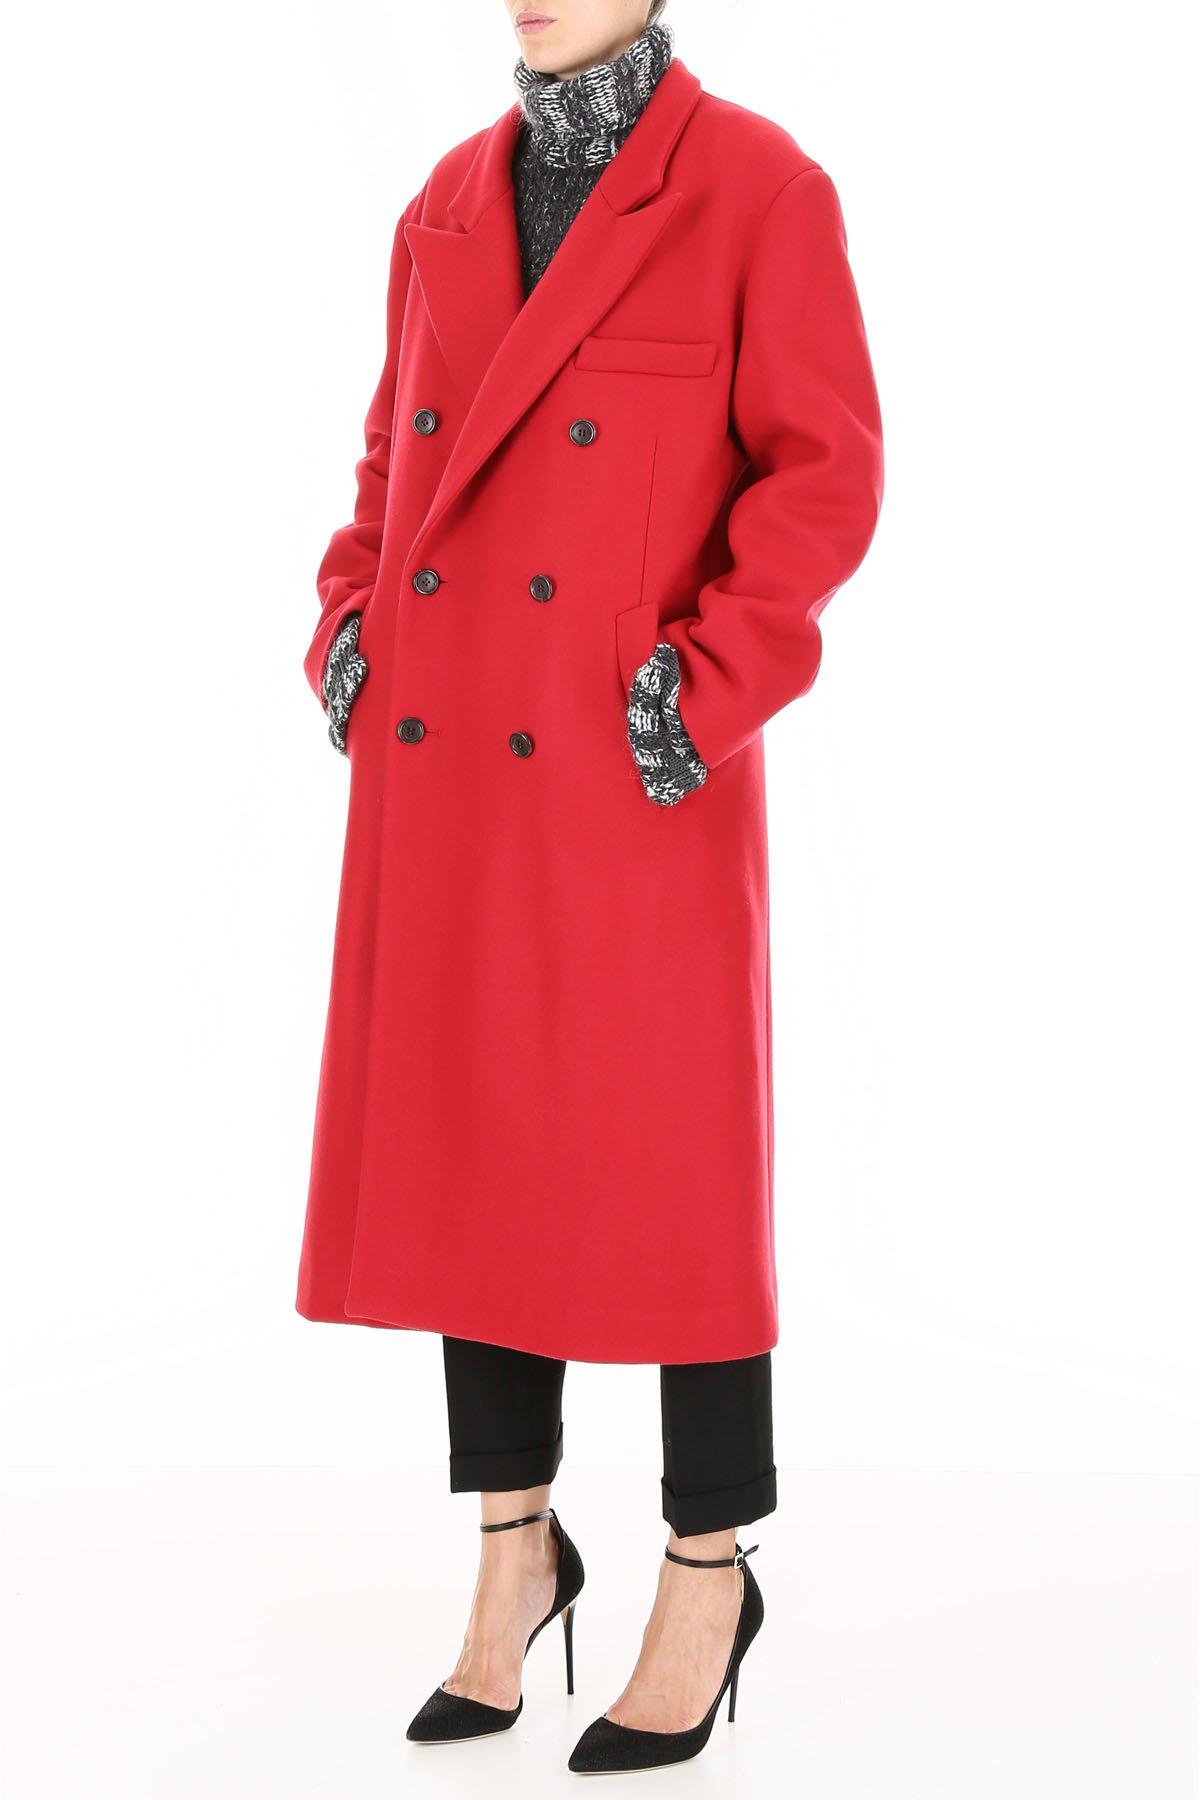 Maison Margiela Double-breasted Trench Coat in Red - Lyst